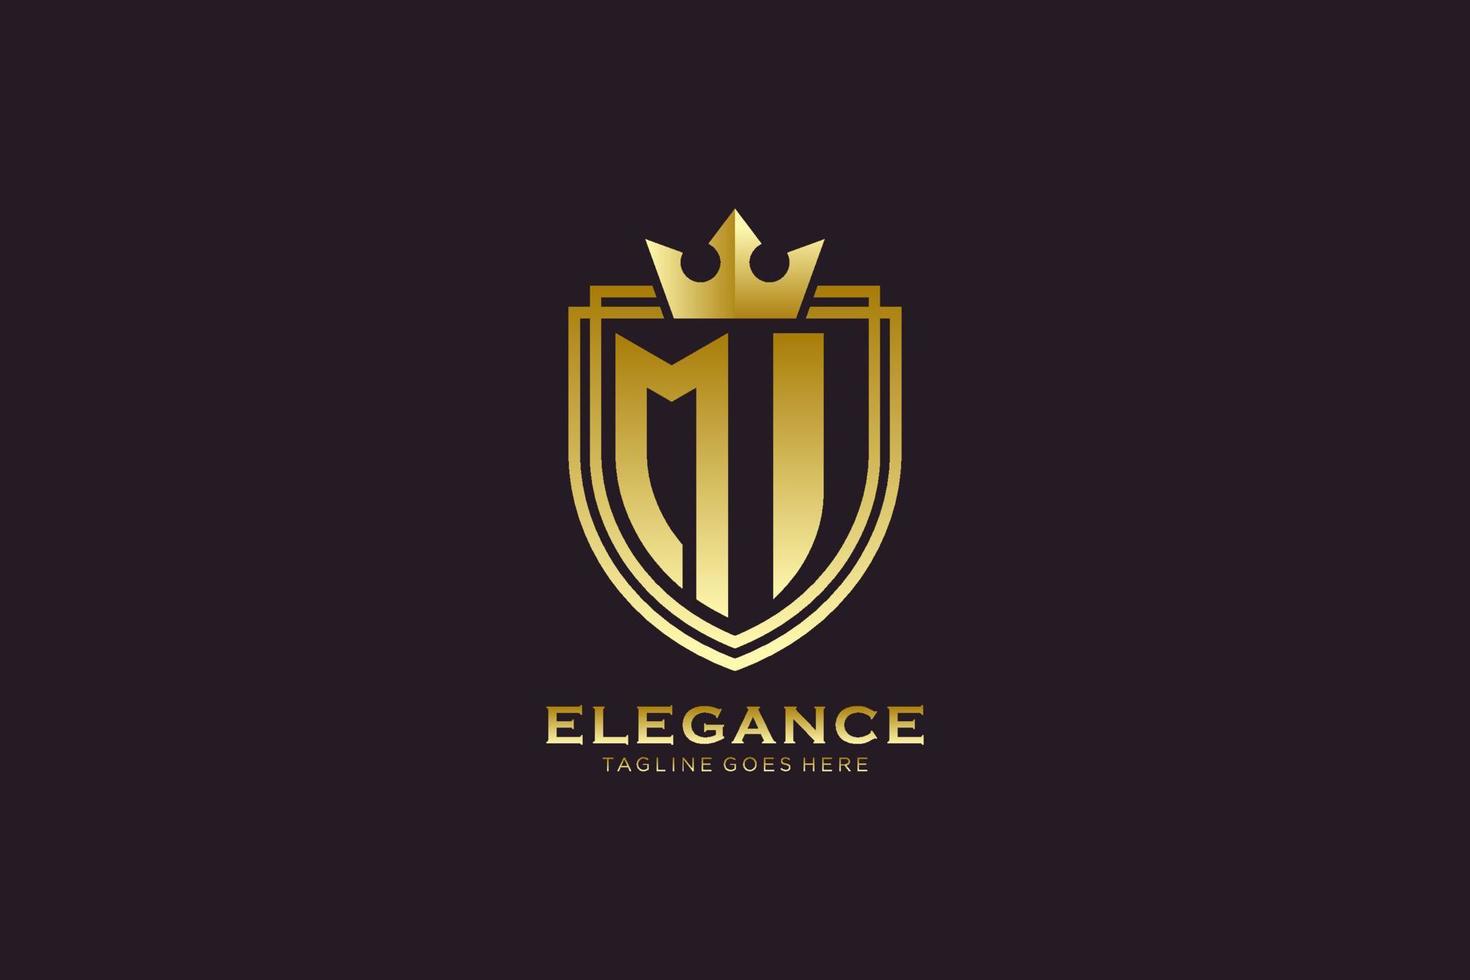 initial MI elegant luxury monogram logo or badge template with scrolls and royal crown - perfect for luxurious branding projects vector